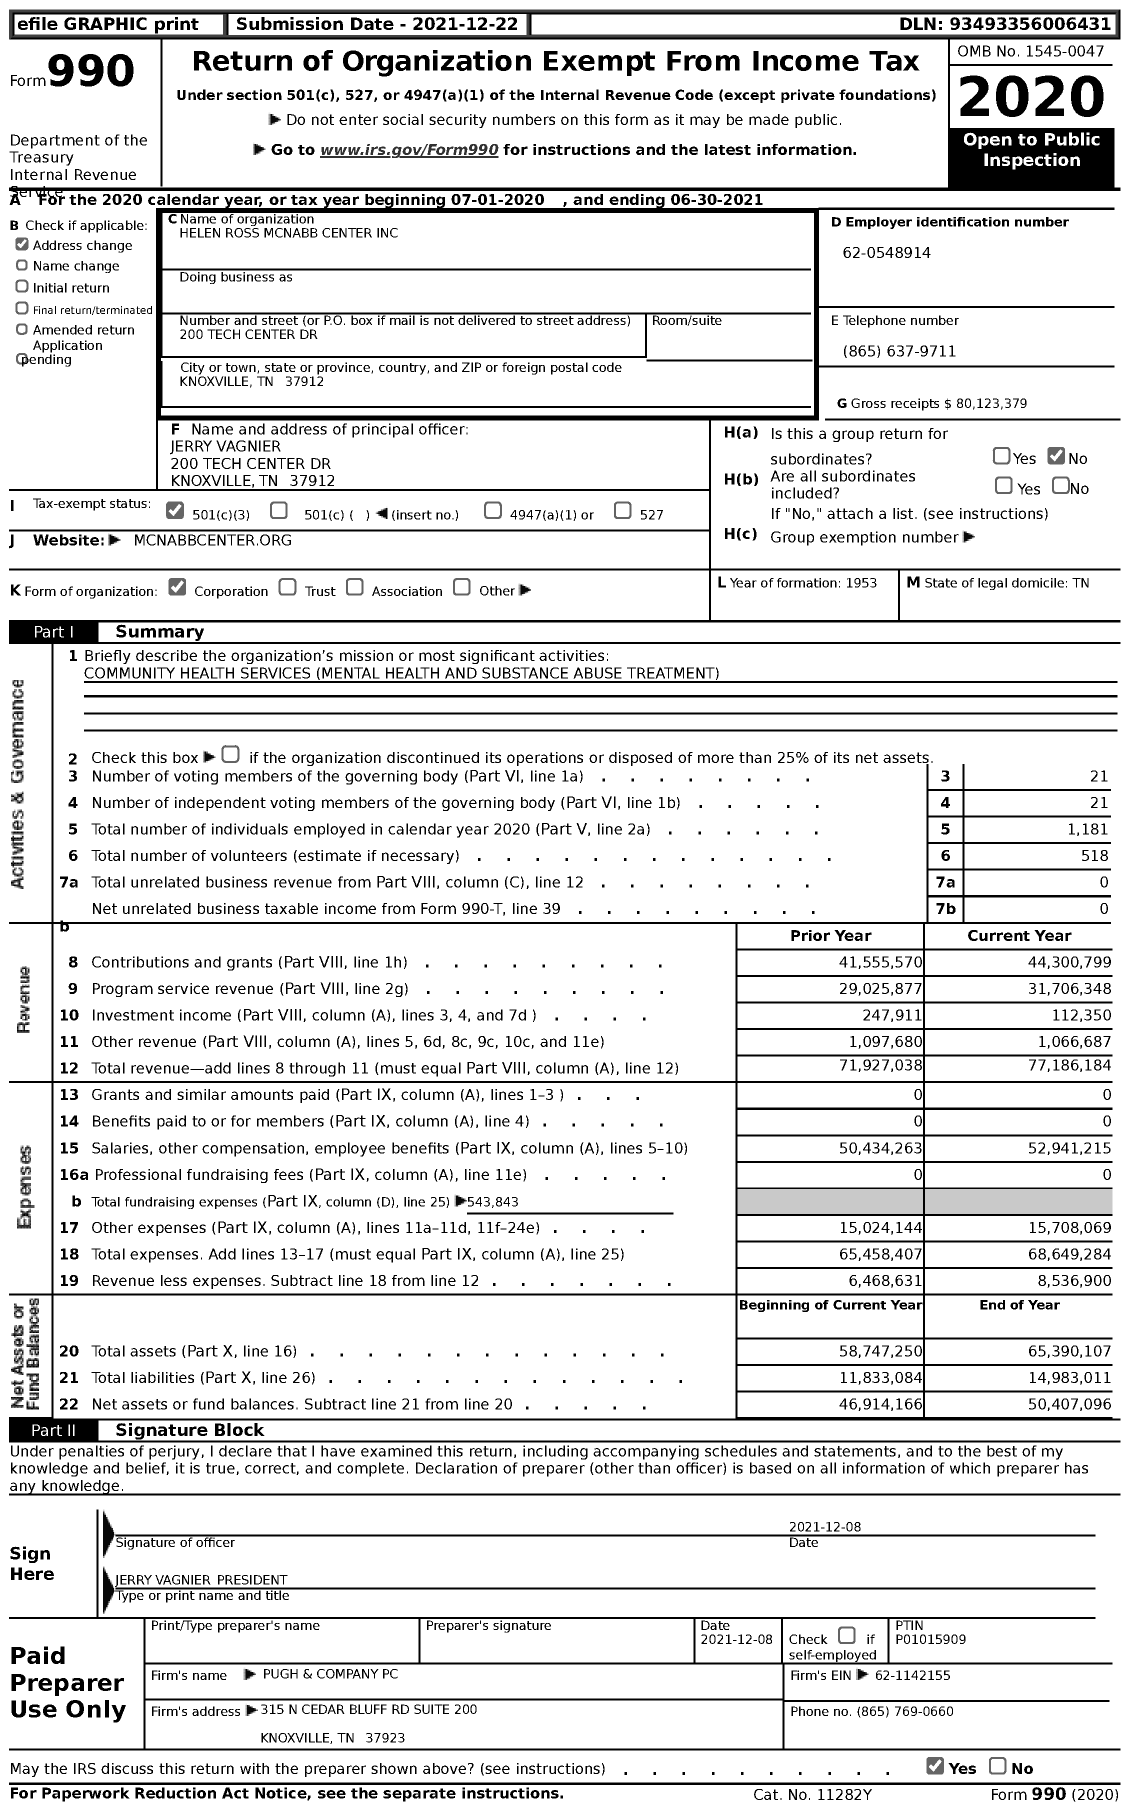 Image of first page of 2020 Form 990 for Helen Ross Mcnabb Center